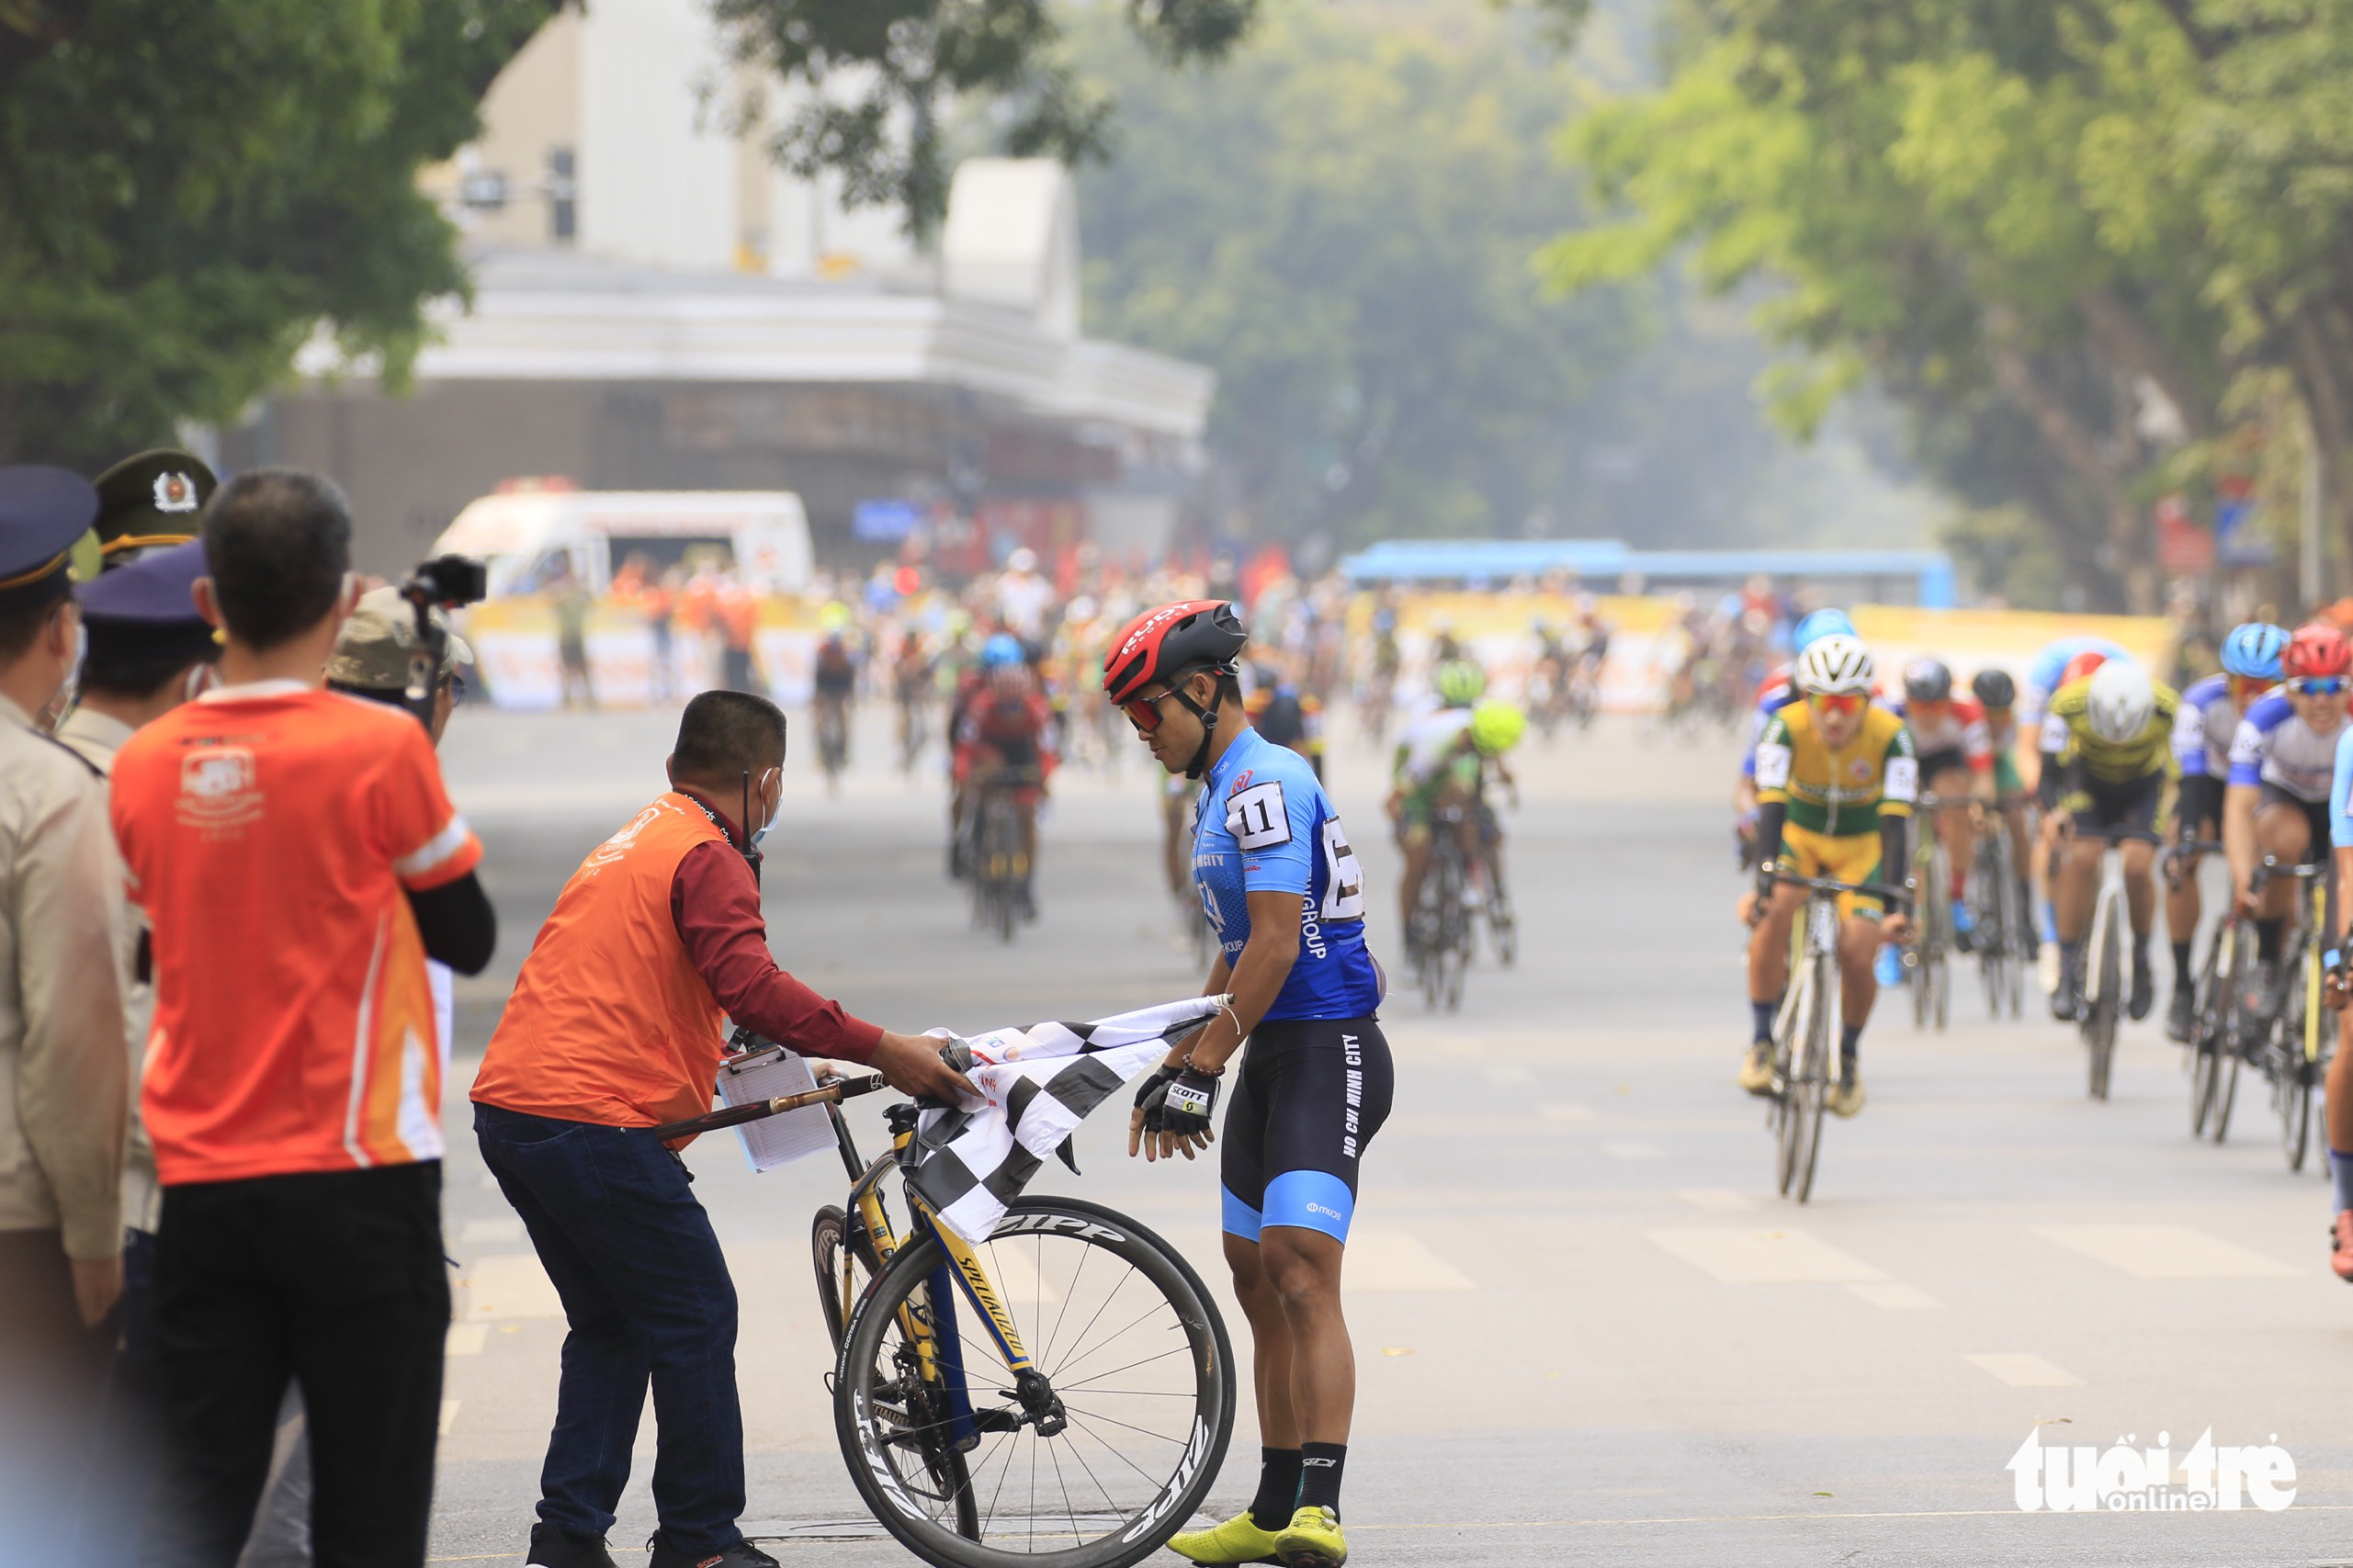 The bike of Le Nguyet Minh from Ho Chi Minh City-New Group breaks down near the finish line in the sixth stage of the 2022 Ho Chi Minh City TV (HTV) Cup tournament in Hanoi, Vietnam, April 10, 2022. Photo: Huynh Van Thuan / Tuoi Tre